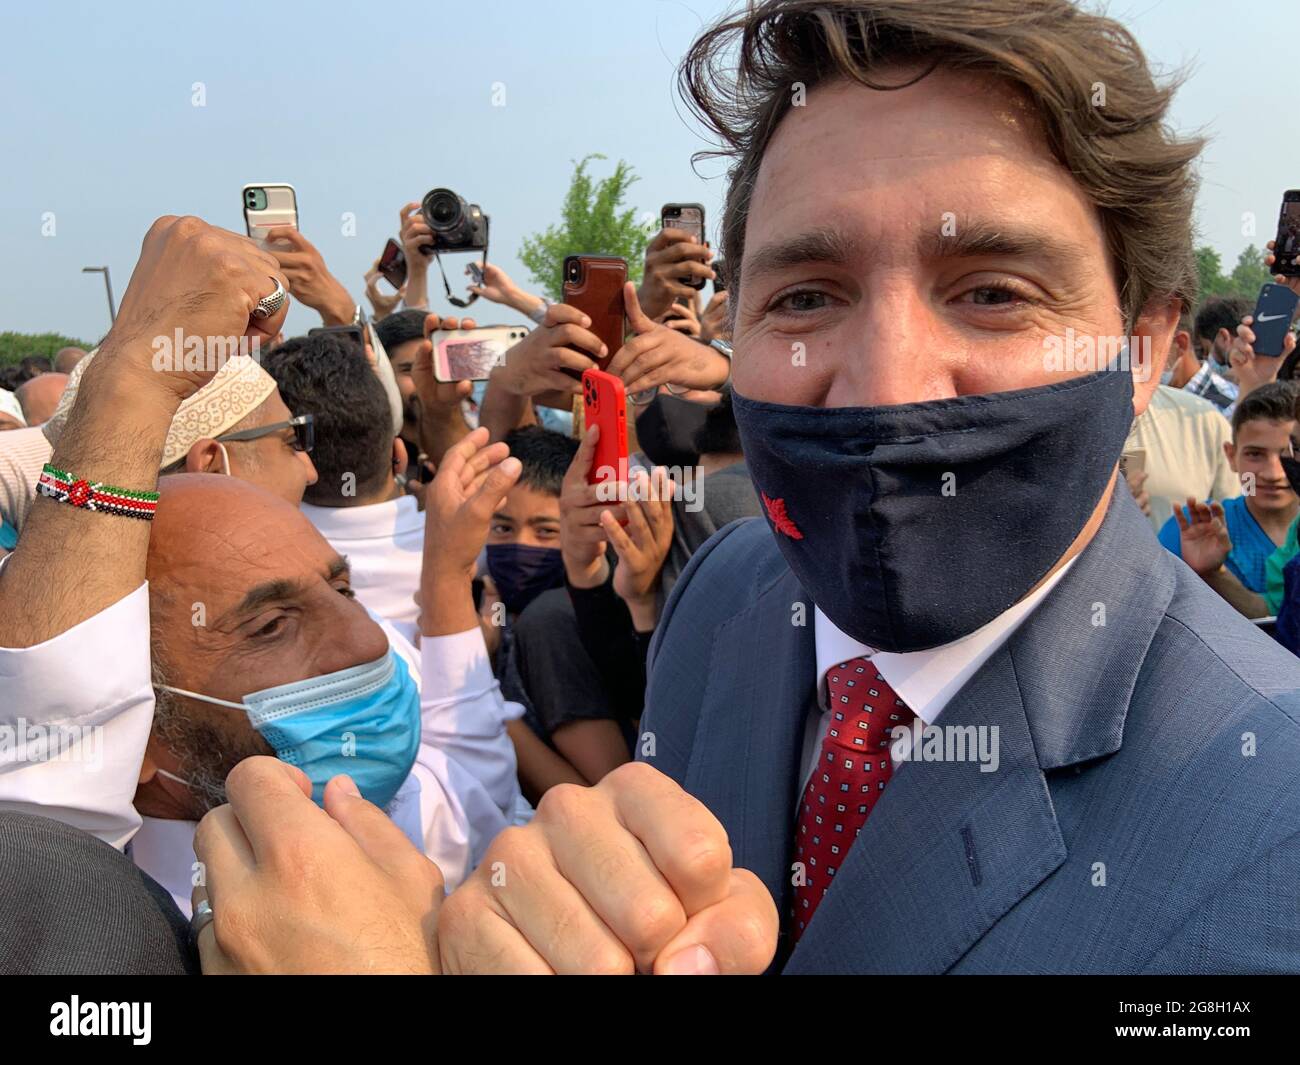 HAMILTON, Ontario, Canada - July 2021: Justin Trudeau caught in th mids of a thick crowd outside the Hamilton Mountain mosque. Stock Photo